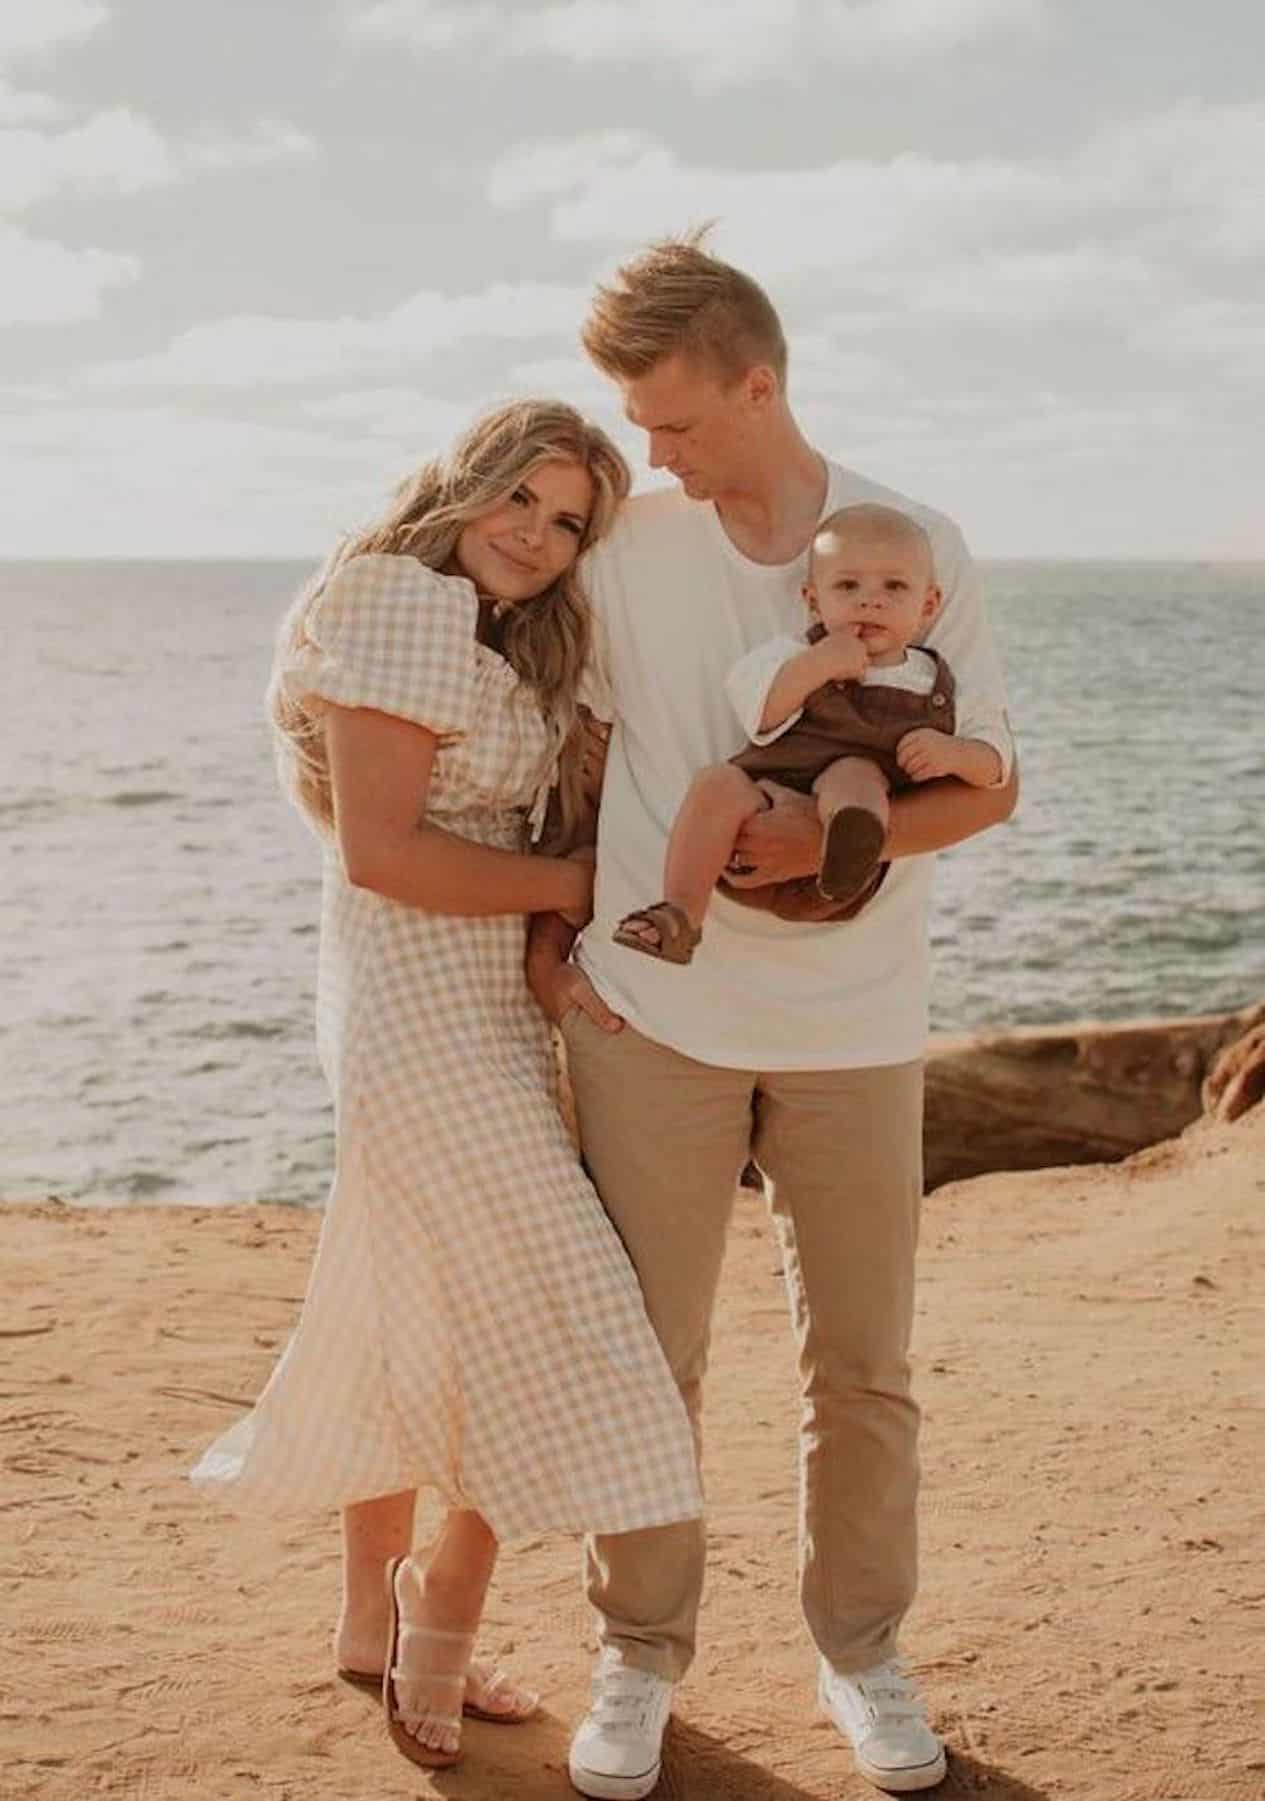 image of a man, woman, and a baby in beige outfits at the beach